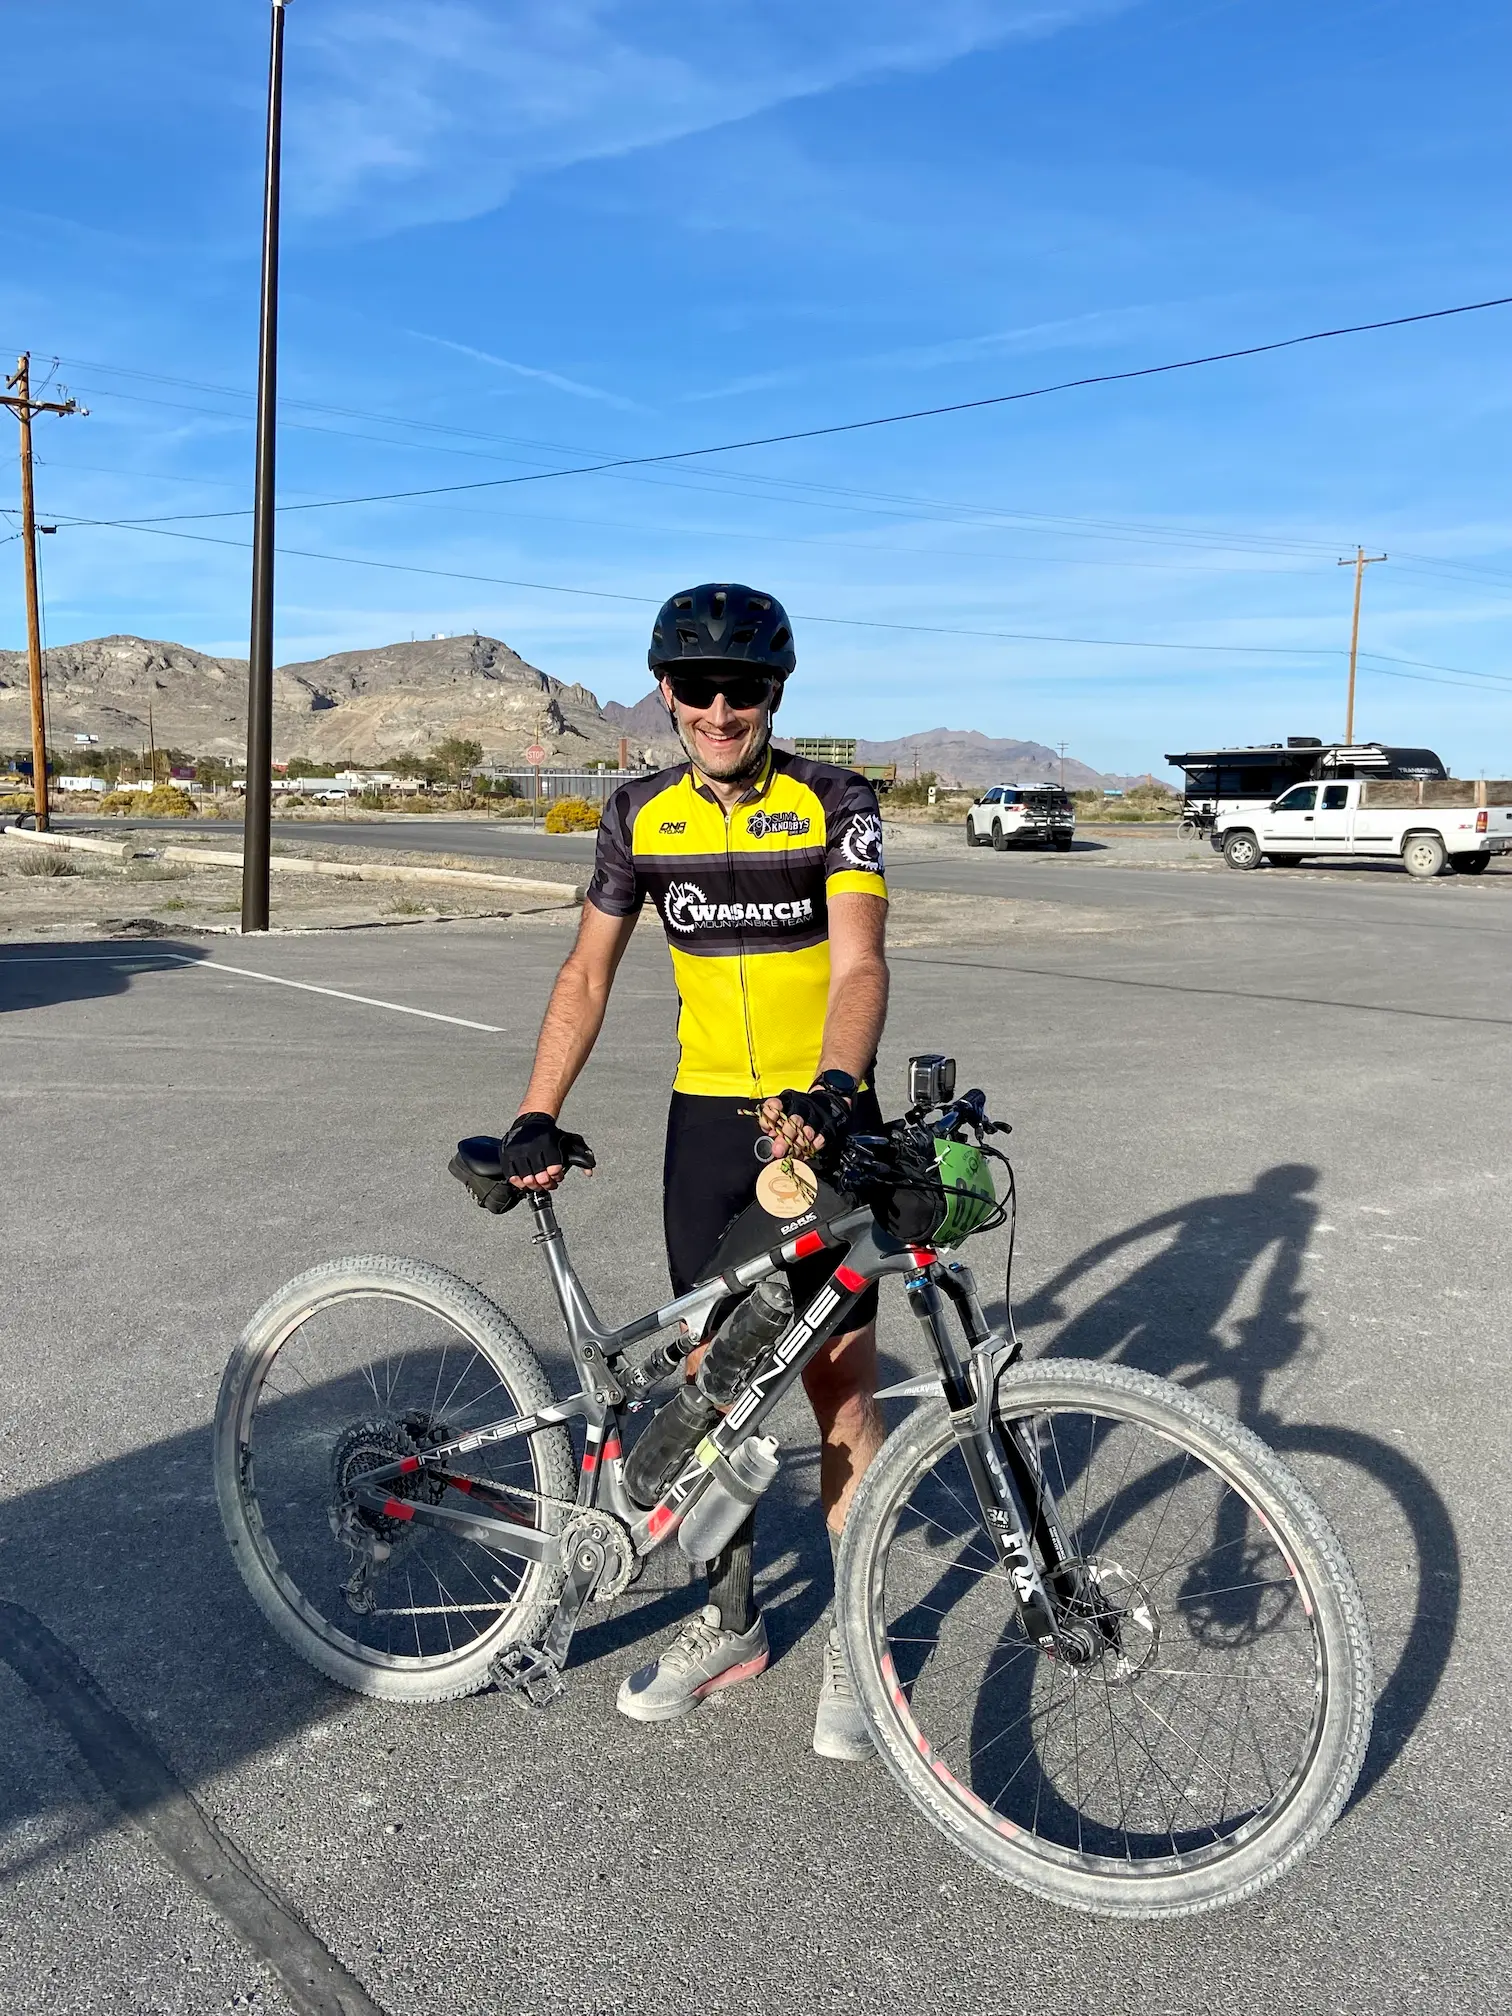 Keith is standing with his Intense Sniper T mountain bike after completing the Salty Lizard 100 gravel race in Wendover, NV.